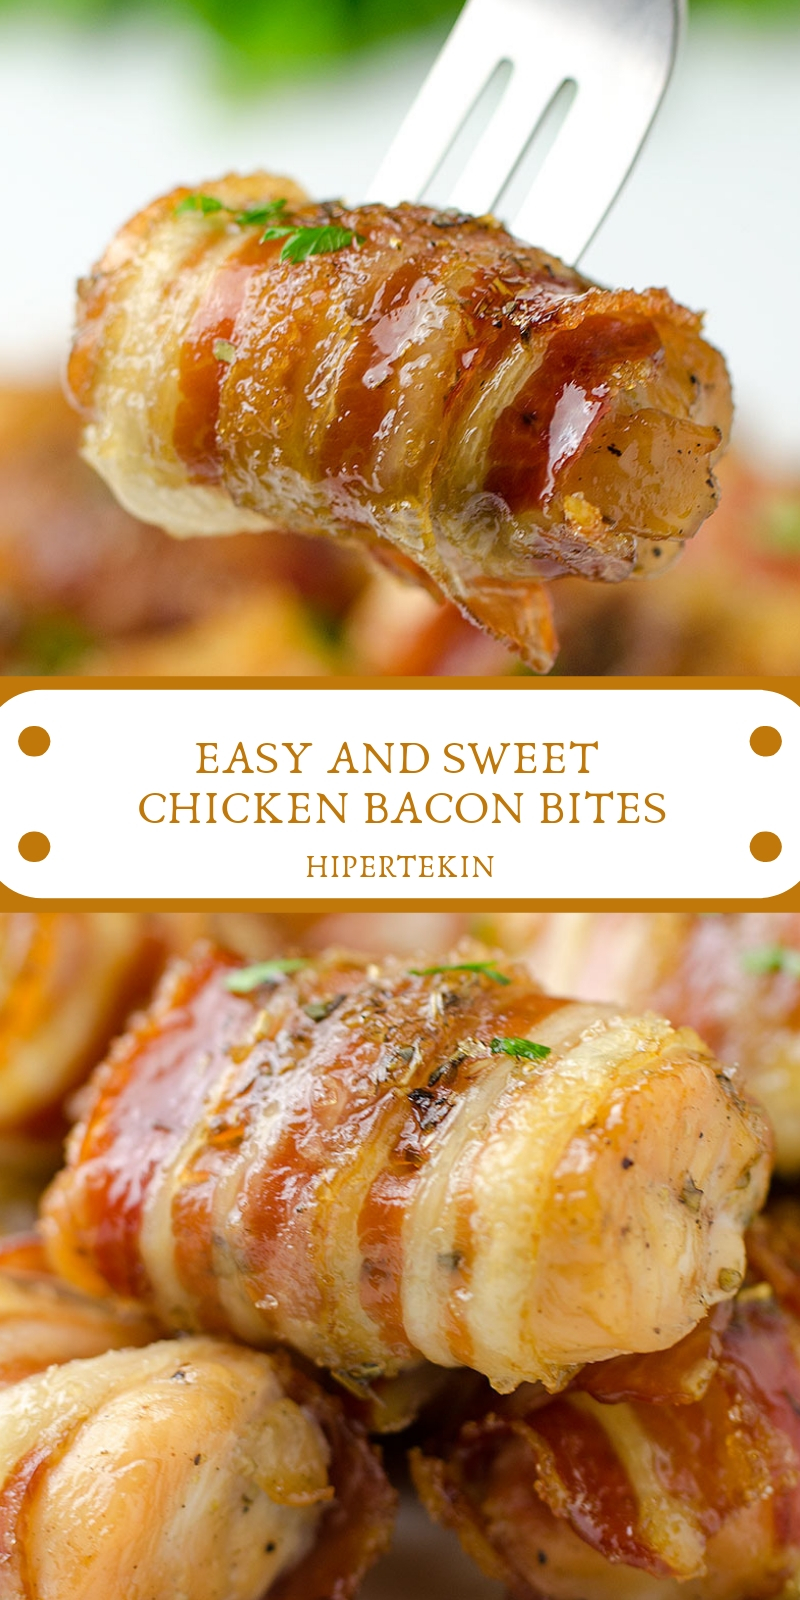 EASY AND SWEET CHICKEN BACON BITES 